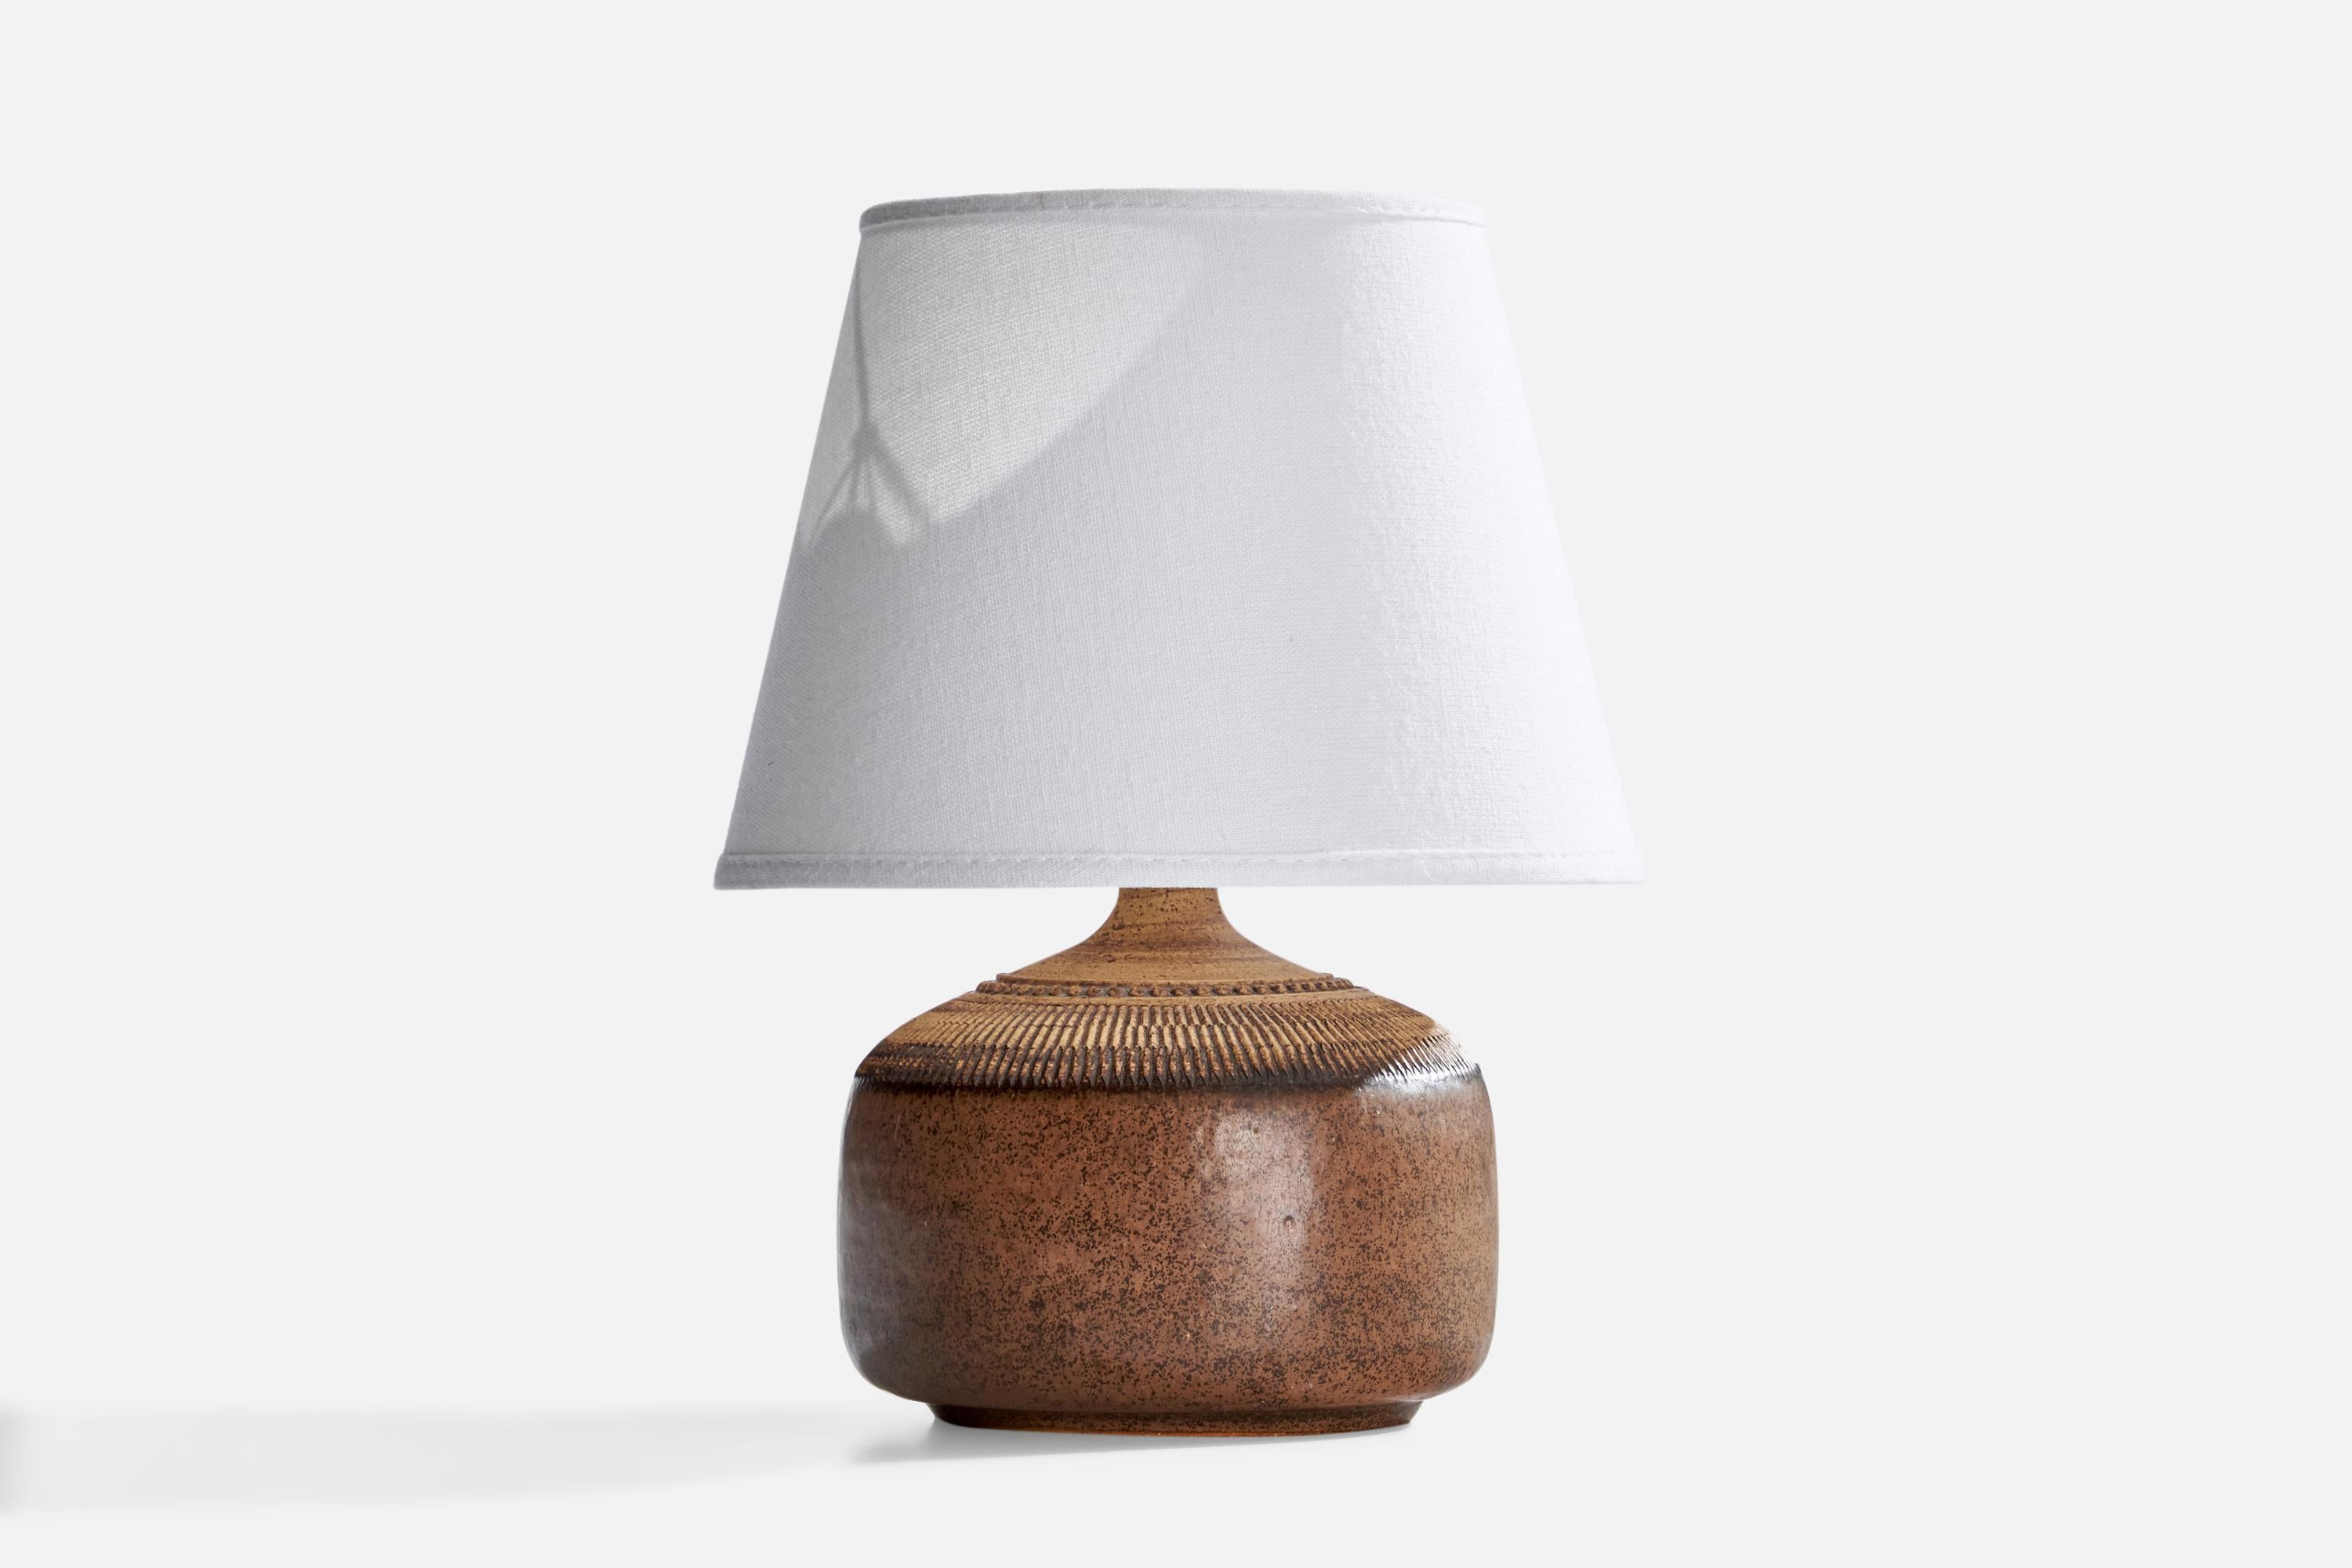 A brown-glazed stoneware table lamp produced by Klase Höganäs, Sweden, c. 1970s.

Dimensions of Lamp (inches): 7” H x 5.5” Diameter
Dimensions of Shade (inches): 5” Top Diameter x 8” Bottom Diameter x 6” H
Dimensions of Lamp with Shade (inches): 10”